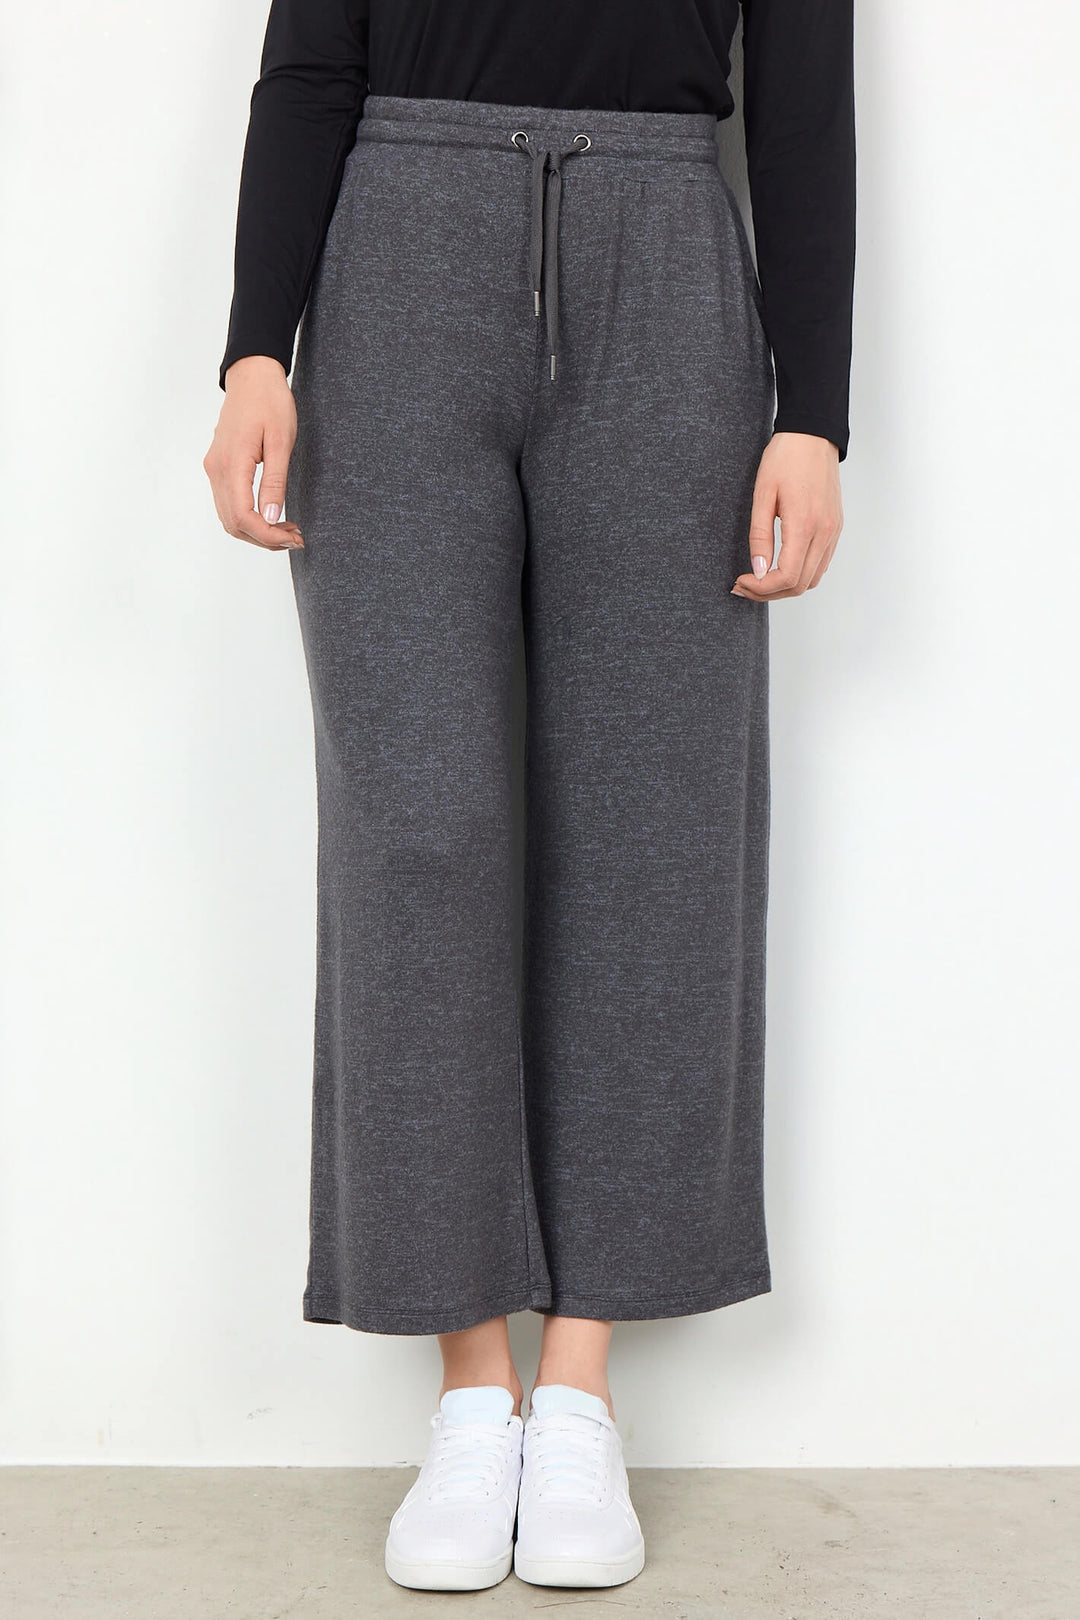 Soyaconcept SC-Biara 74 25388 Col 99780 Dark Grey Soft Touch Cropped Trousers - Dotique